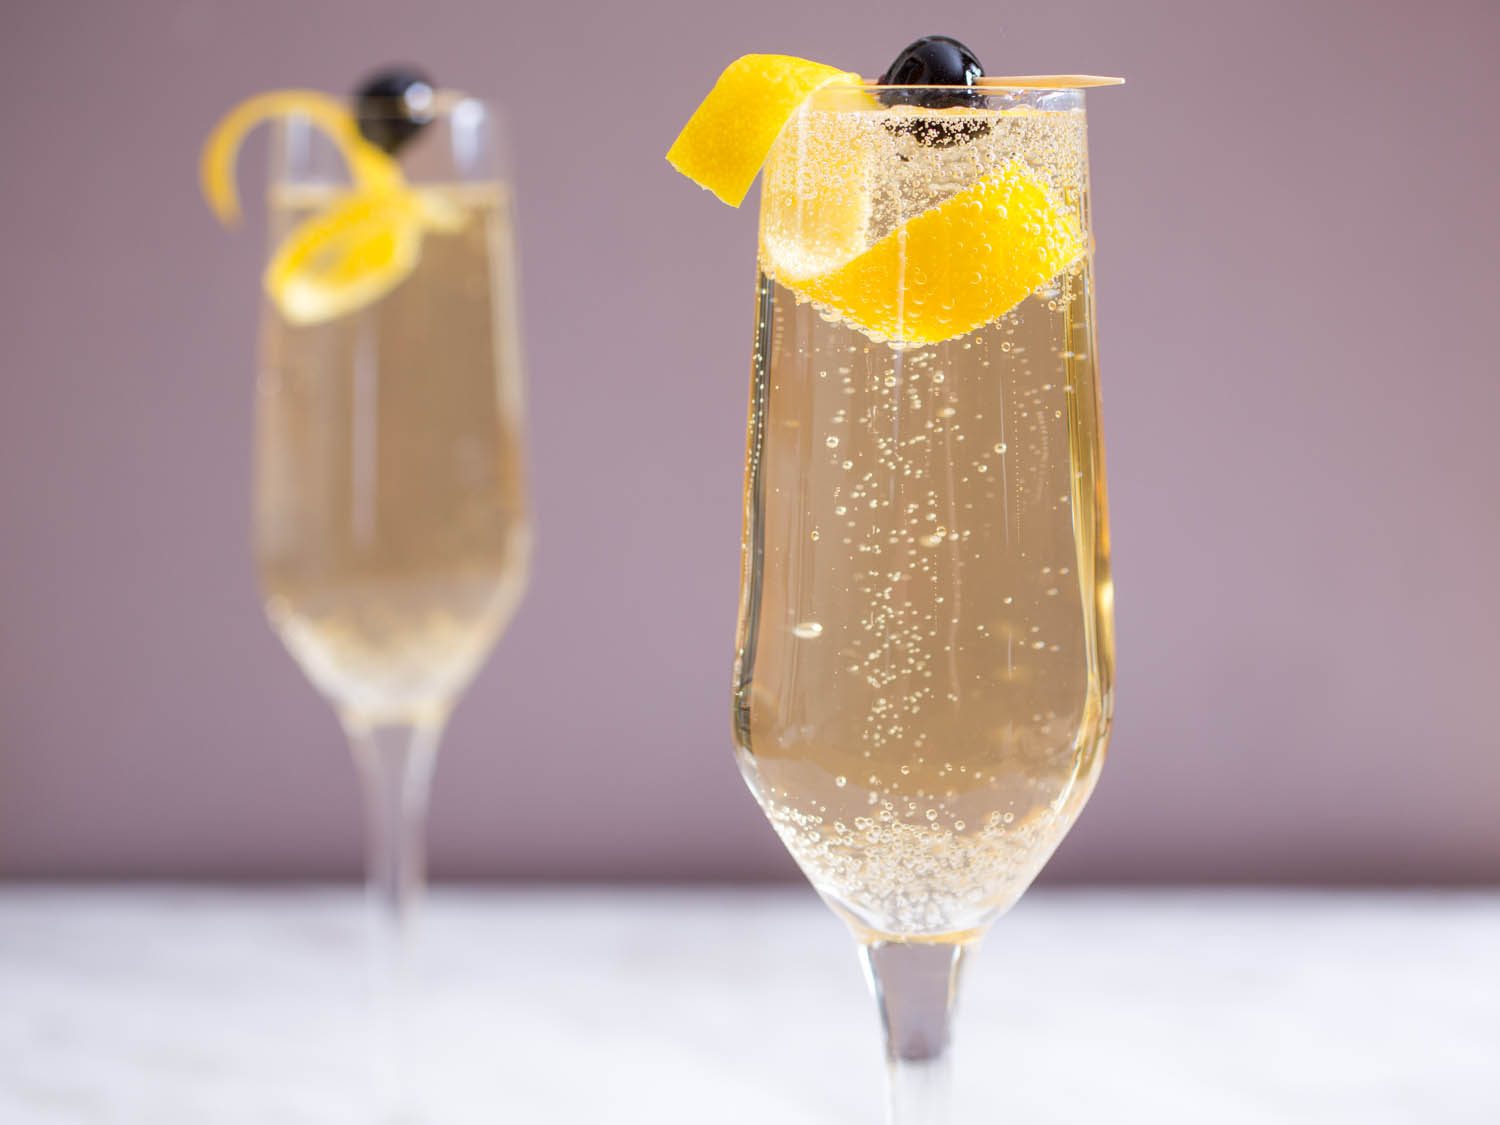 Pha cocktail French 75